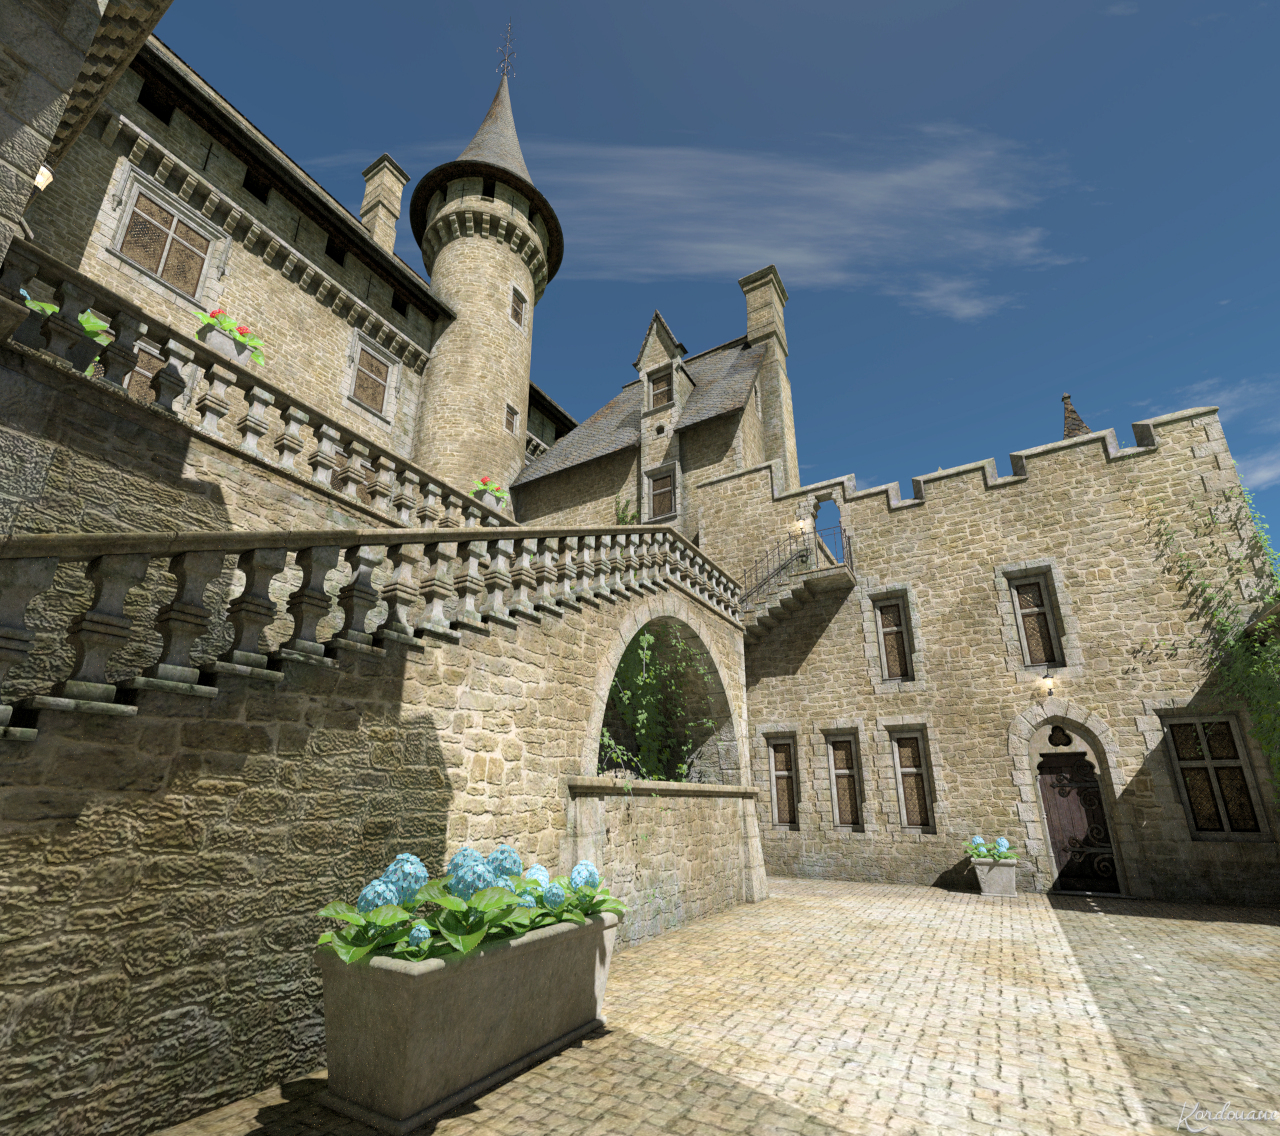 EXT. CHATEAU MEDIEVAL 2 – DAY